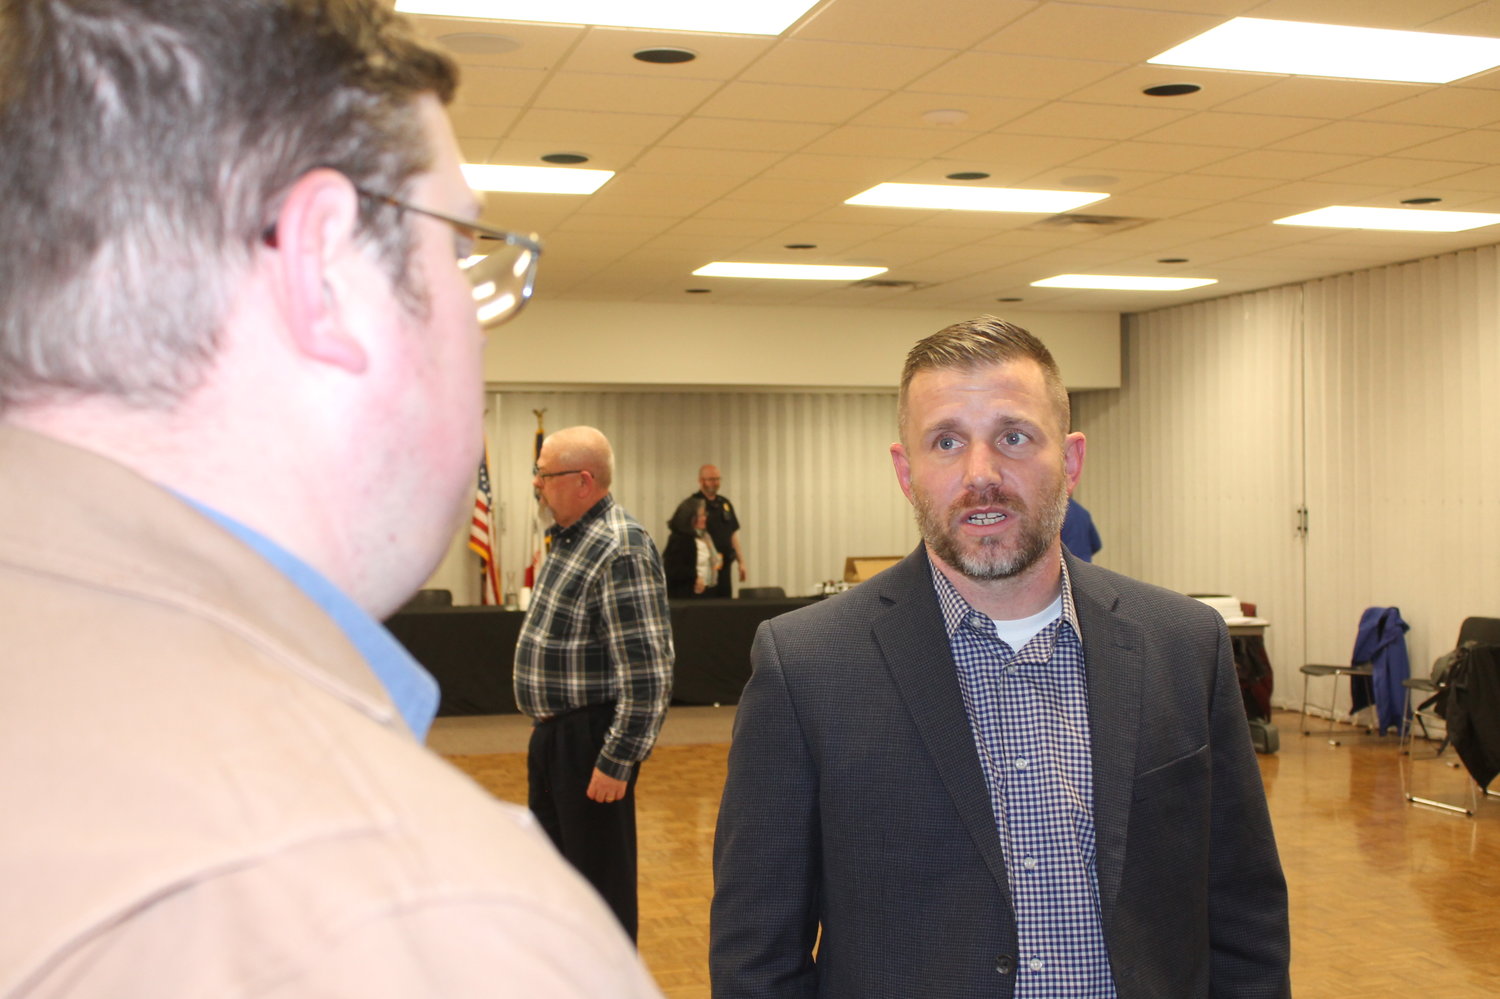 Brandon Achen (right) is the new President & Chief Executive Officer effective May 31 for West Liberty Foods. He is speaking with WeLead Executive Director Ken Brooks  after a West Liberty City Council meeting at the beginning of May.